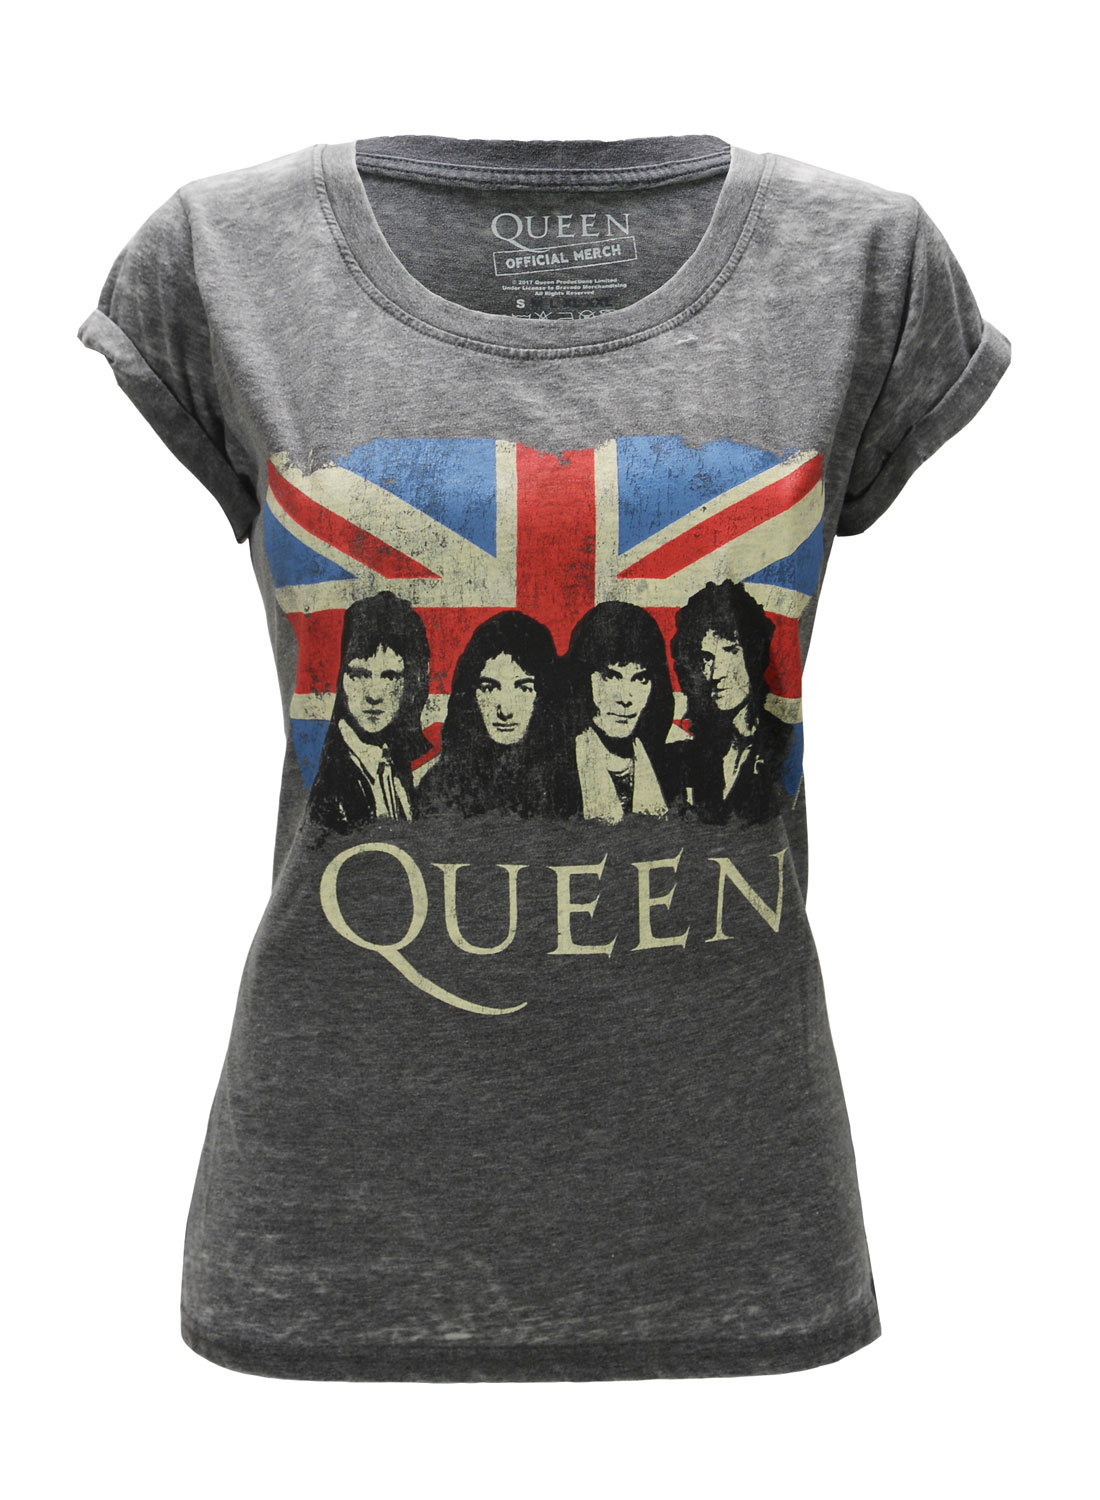 Queen Vintage Union Jack Girly Top